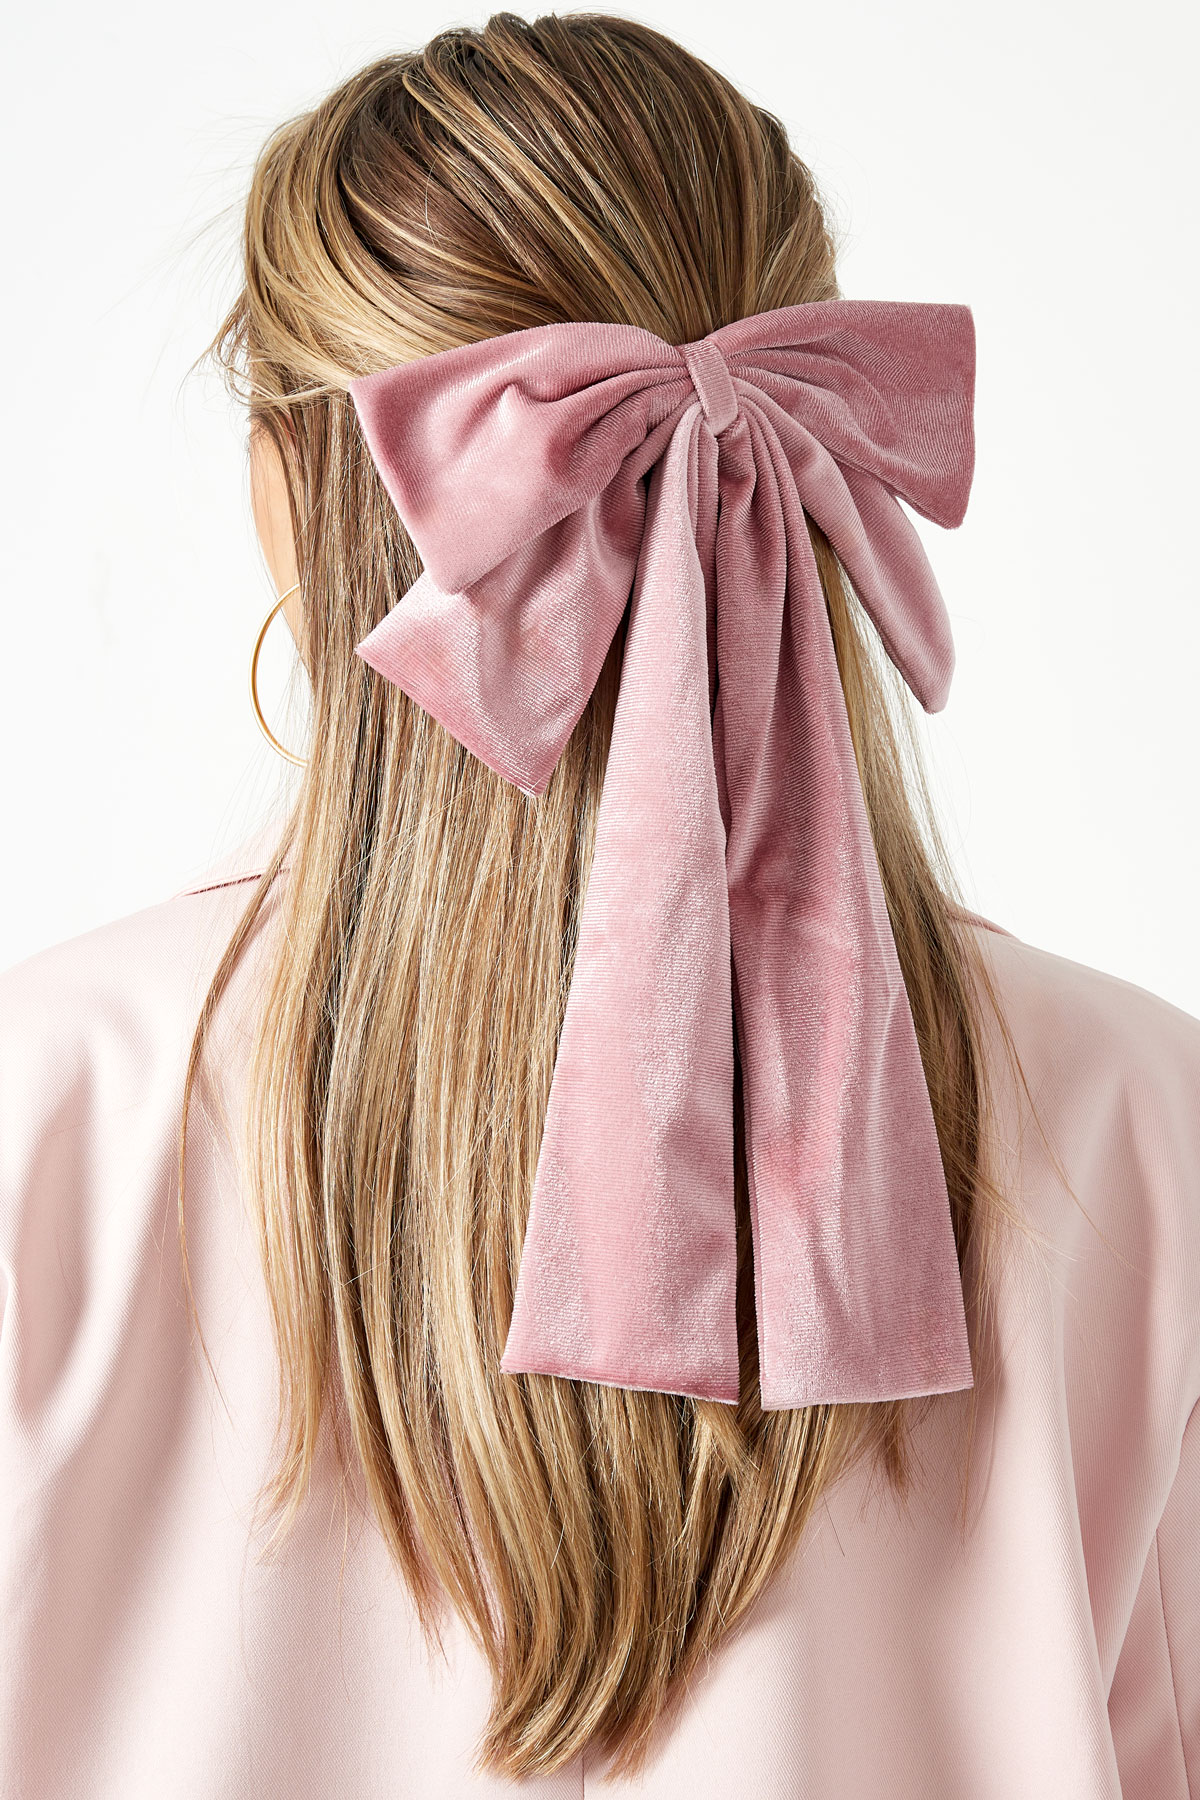 Cute hair bow - pink h5 Picture2